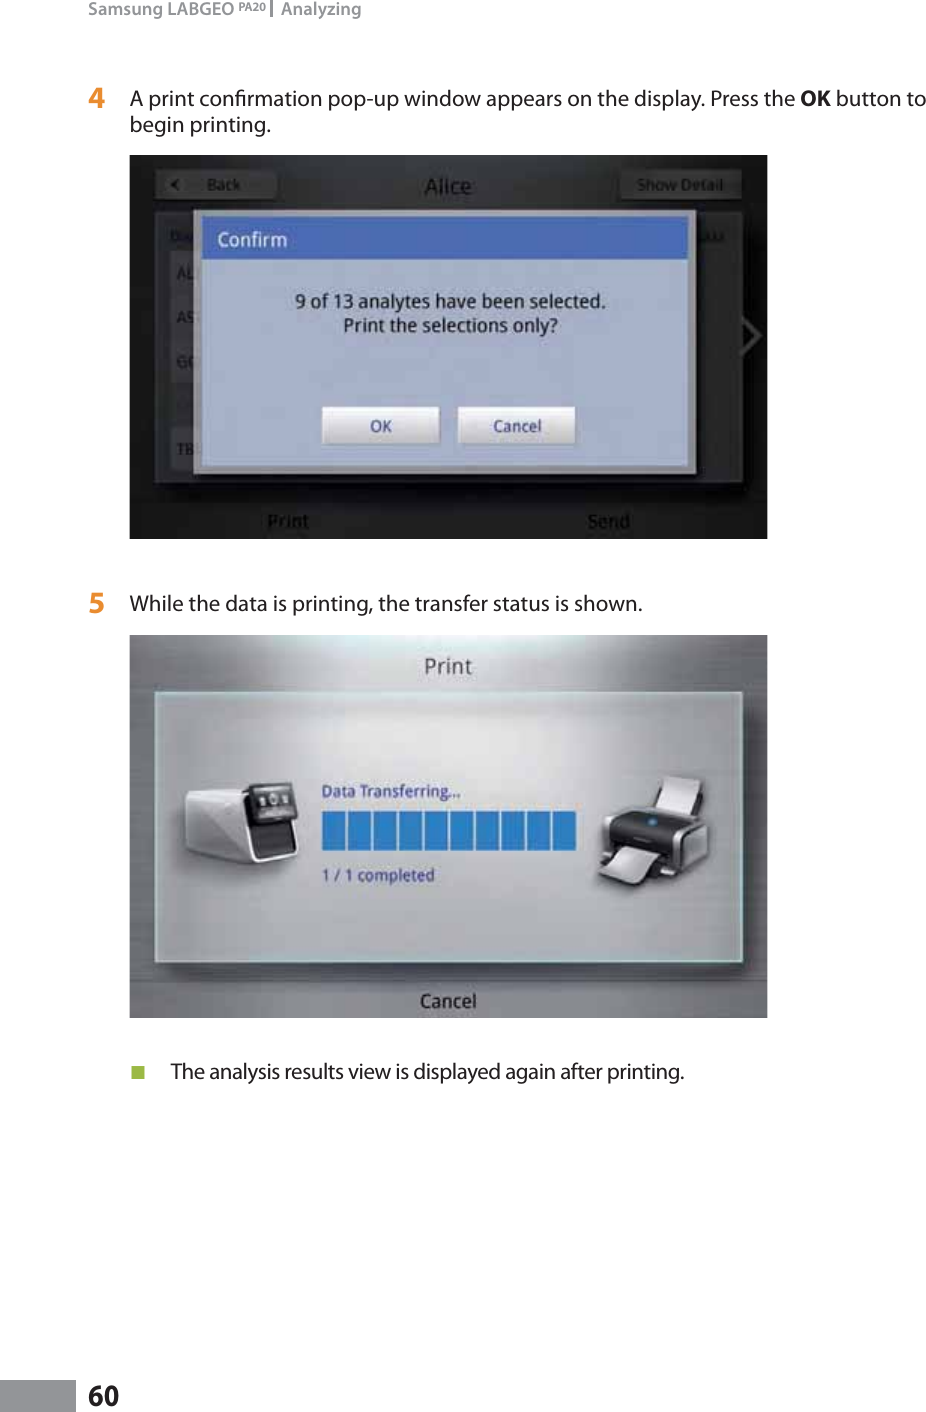 60Samsung LABGEO PA20   Analyzing4  A print conrmation pop-up window appears on the display. Press the OK button to begin printing. 5  While the data is printing, the transfer status is shown. ŶThe analysis results view is displayed again after printing.